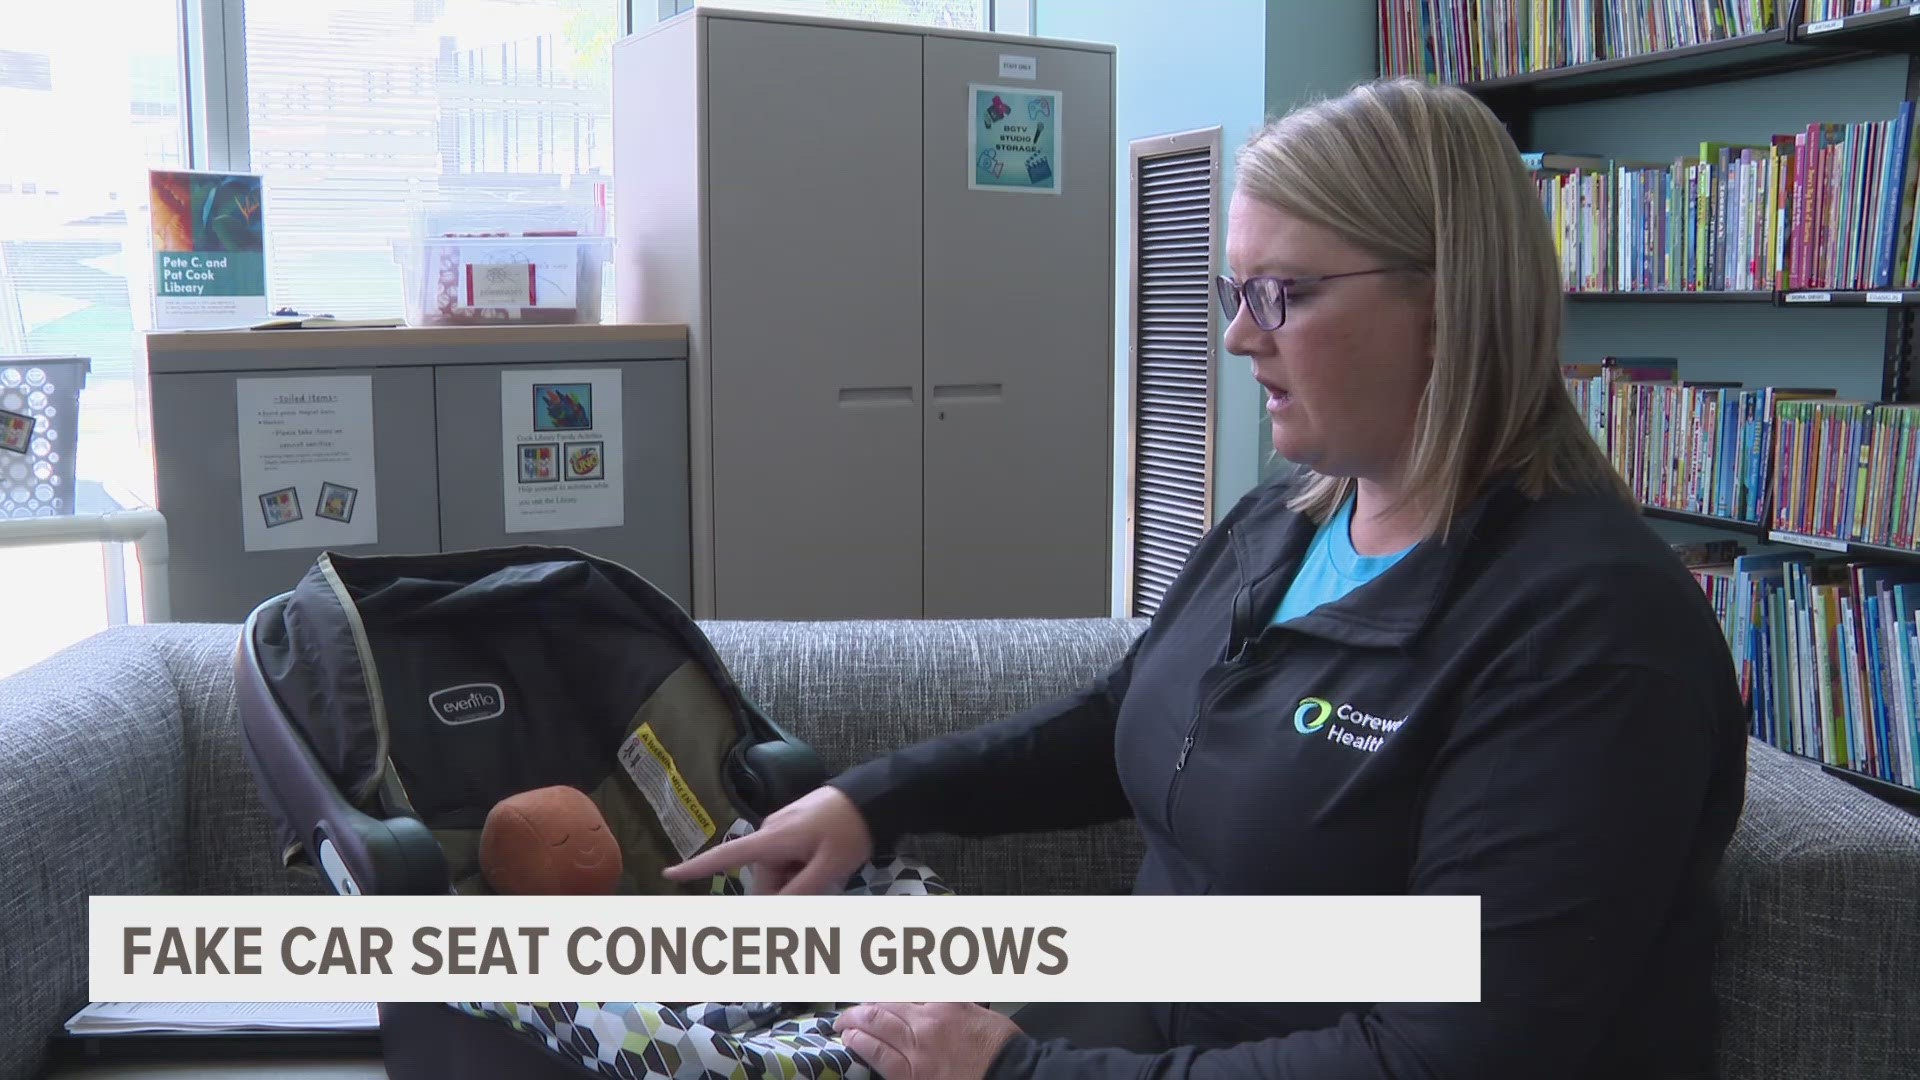 Fake or counterfeit car seats are sold online that don't meet U.S. safety standards. Here's how to spot them.